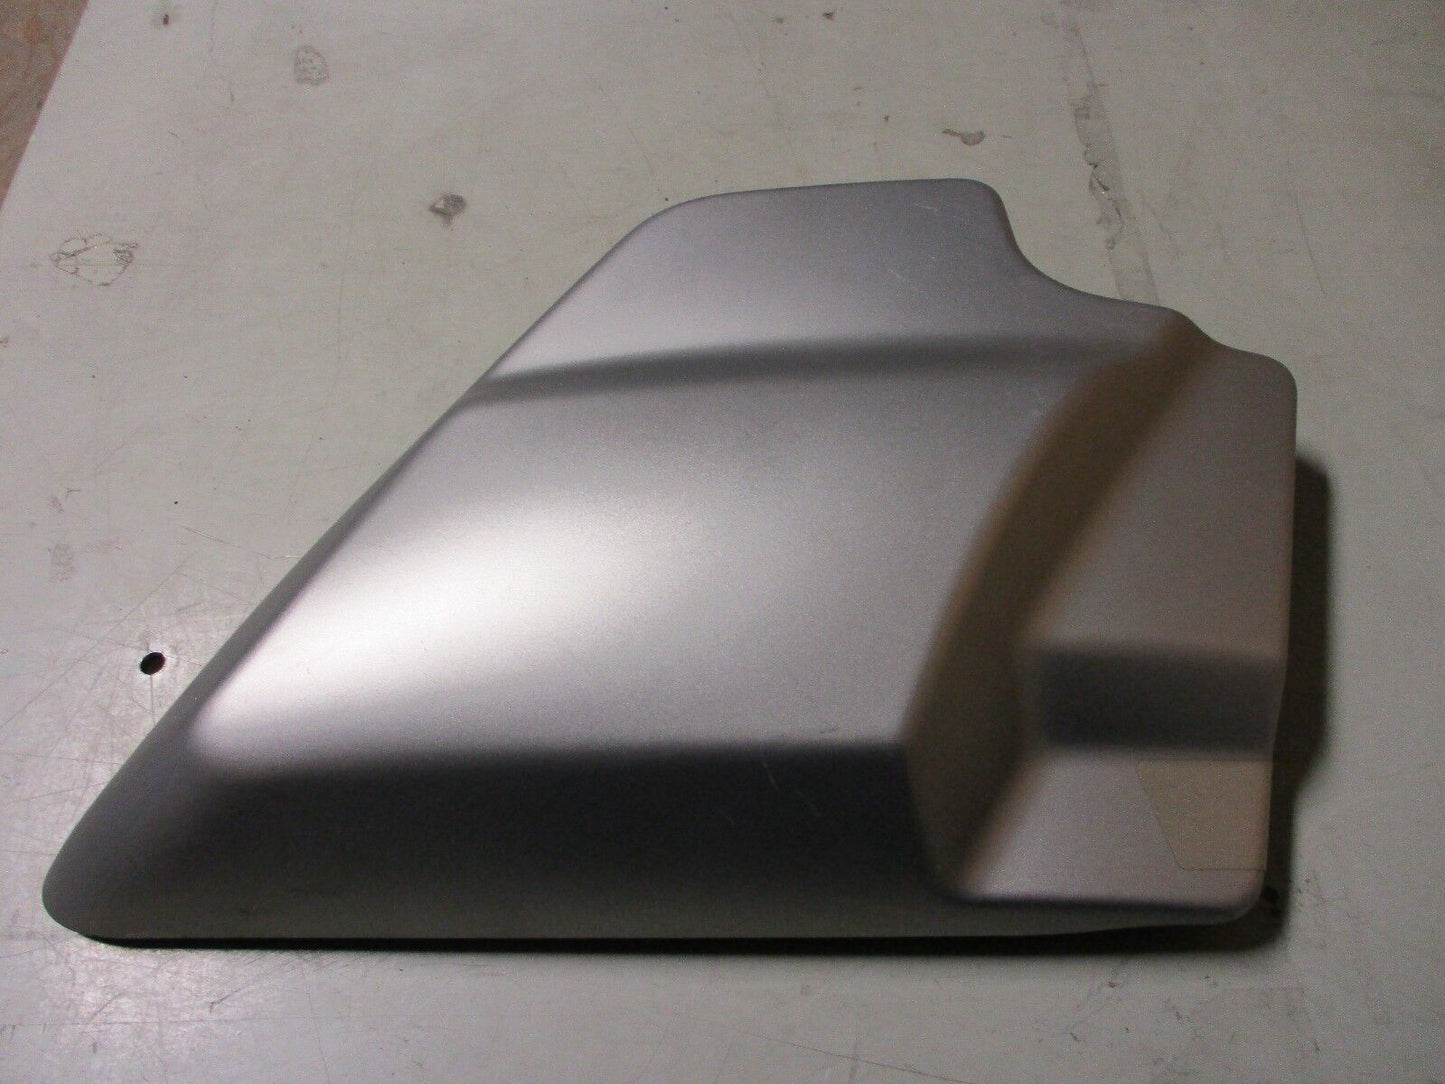 RIGHT SIDE COVER FOR 2009 AND LATER HARLEY-DAVIDSON TOURING MODELS - 66048-09